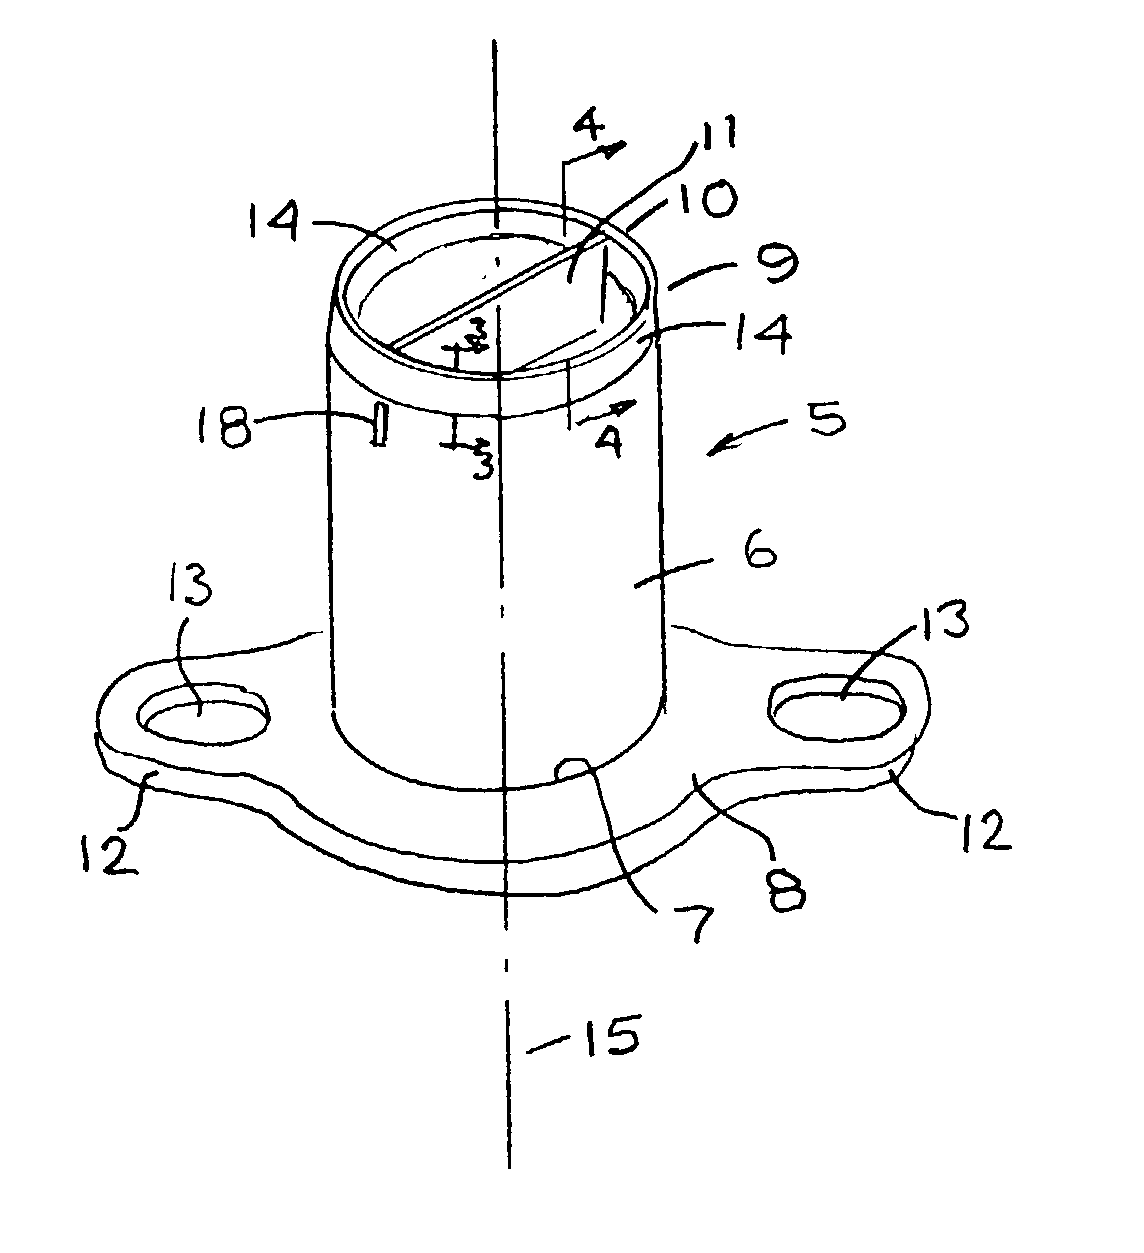 Fruit coring device for producing a closed bore